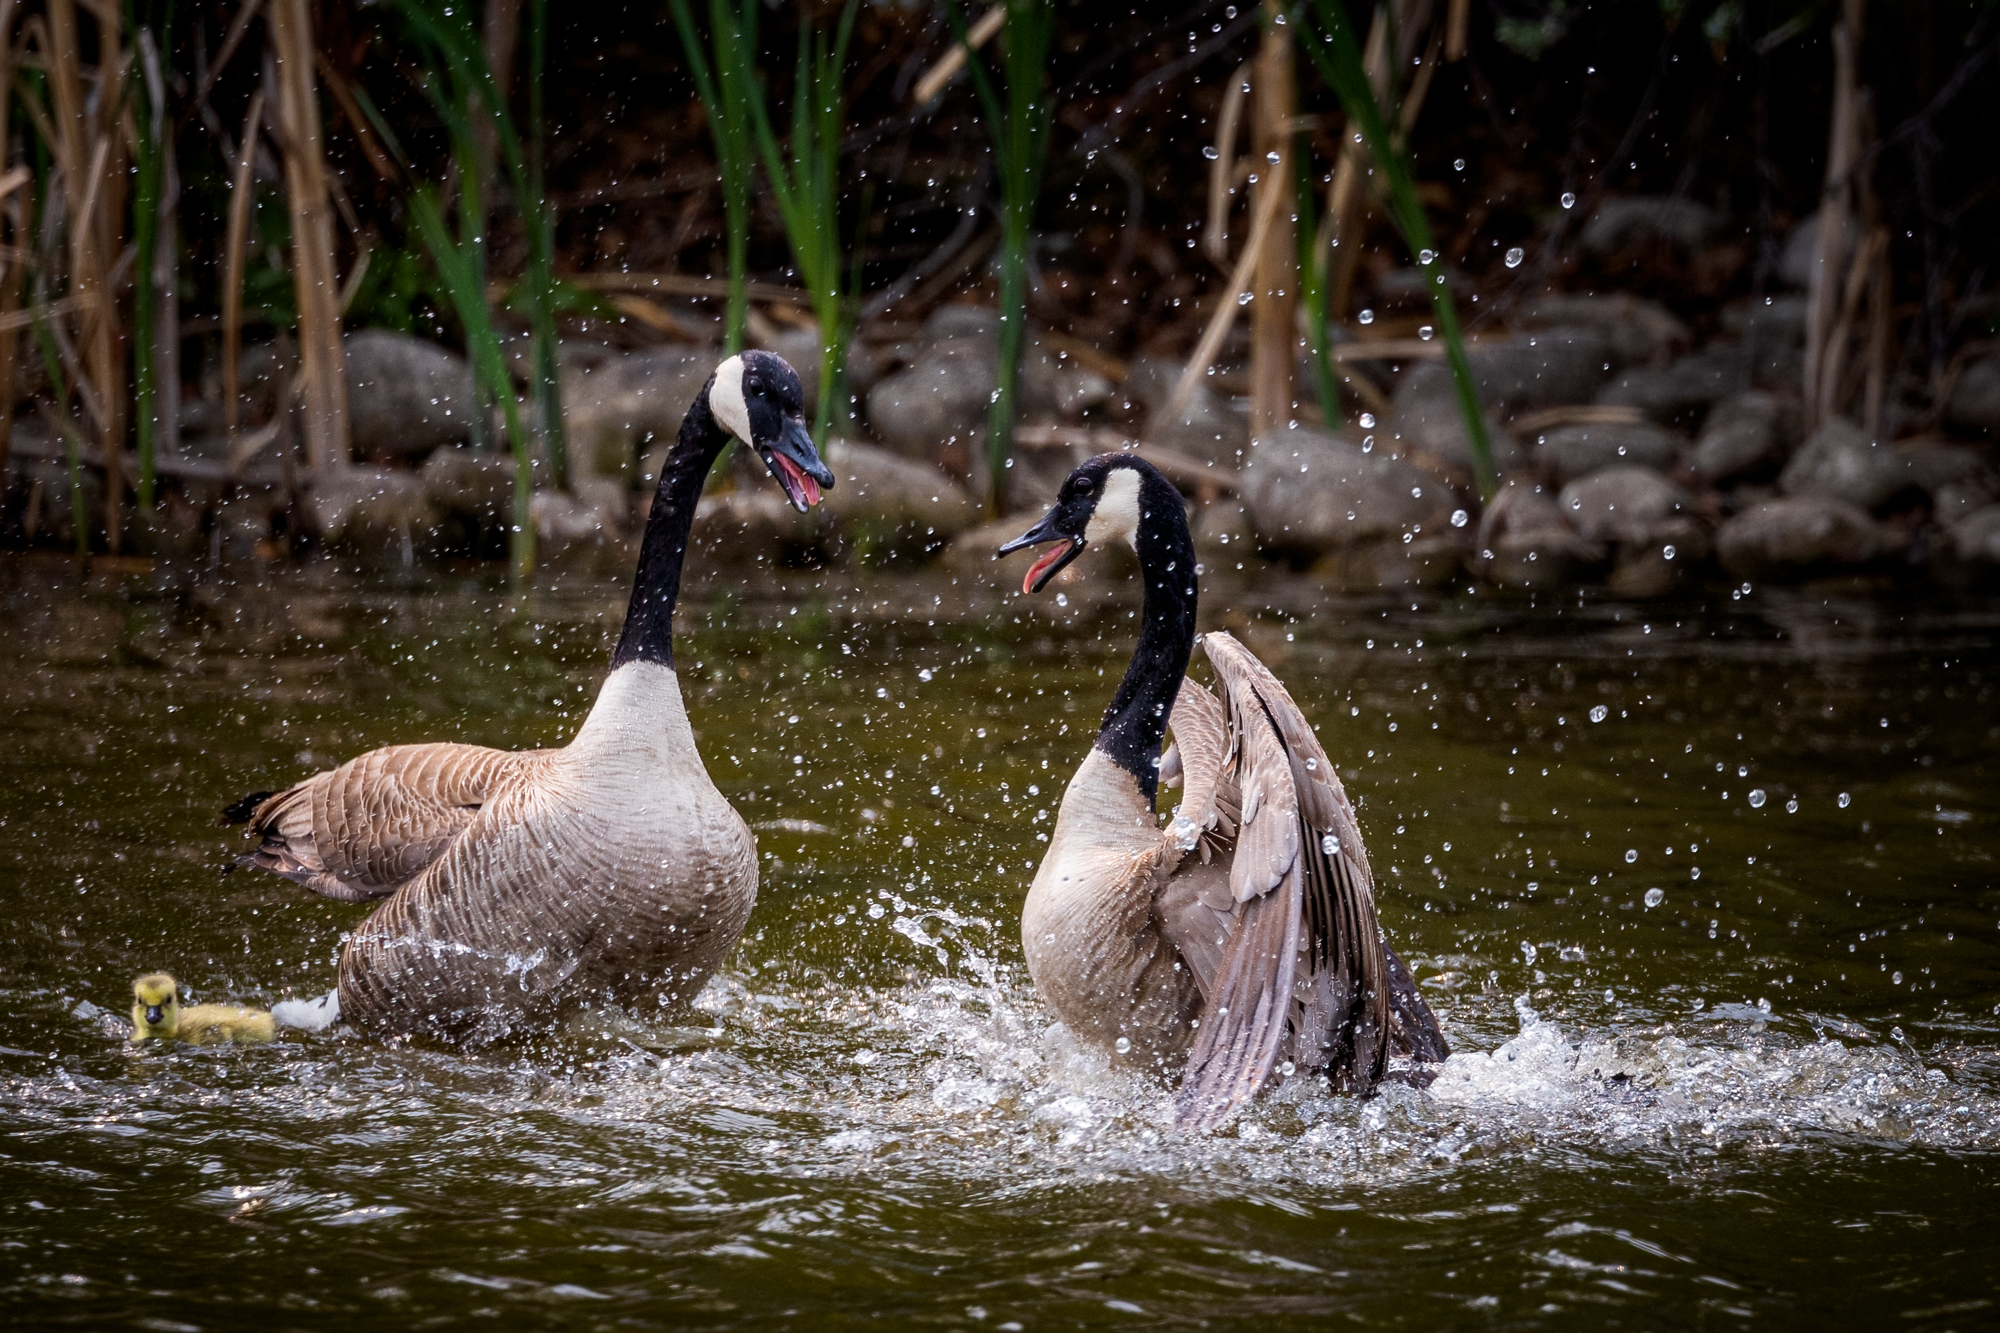 A pair of Canada Geese splashing in the water